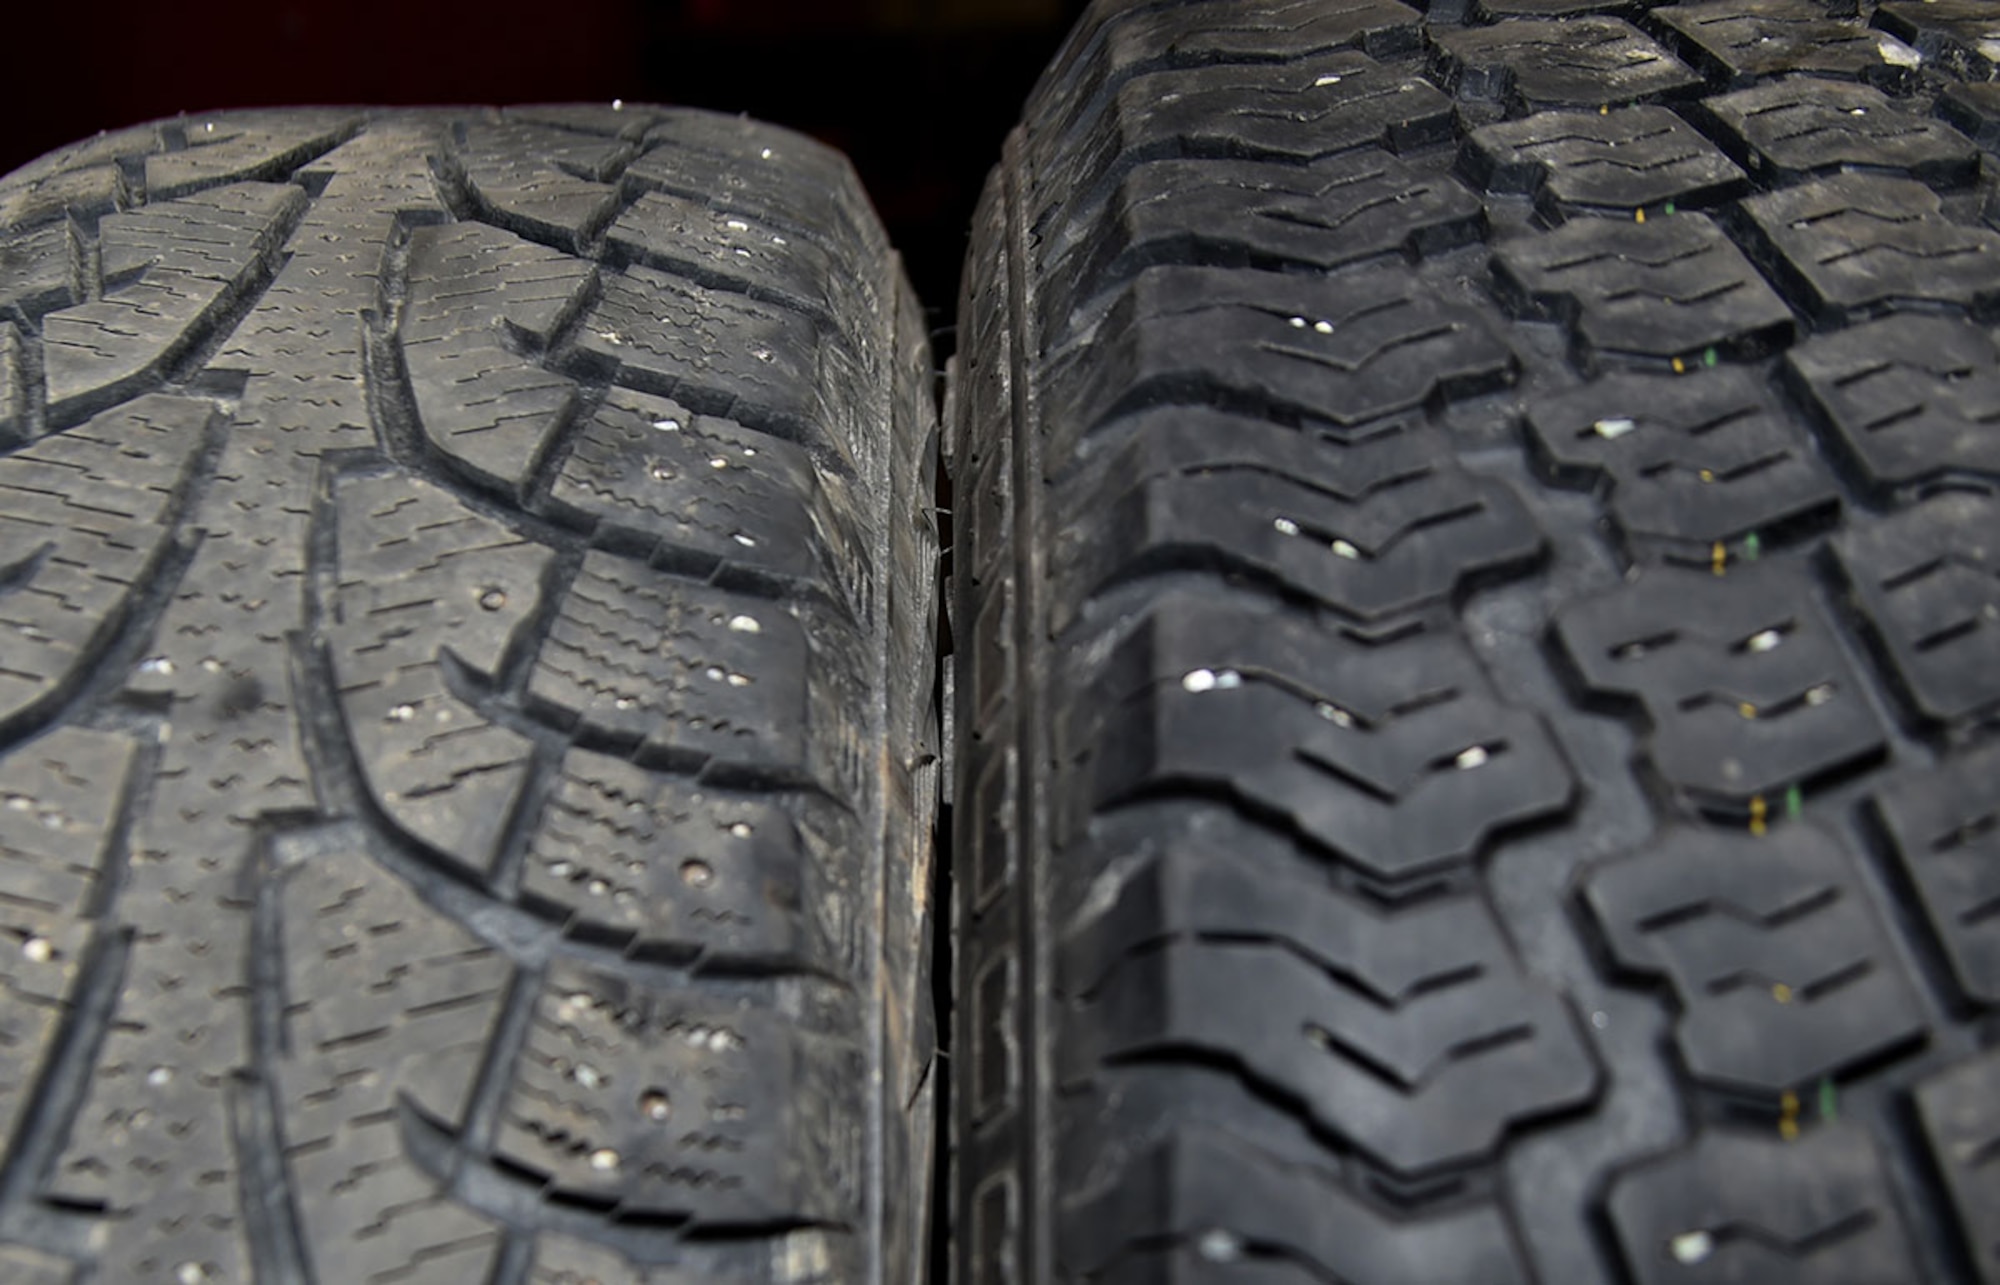 A set of winter tires are dismounted while a set of summer tires are mounted on rims at the Auto Skills Center, Joint Base Elmendorf-Richardson, Alaska, April 14, 2016. According to the Division of Motor Vehicles, it is unlawful to operate a motor vehicle with studded tires on a paved highway or road from May 1 through September 15. (U.S. Air Force photo by Staff Sgt. Sheila deVera)